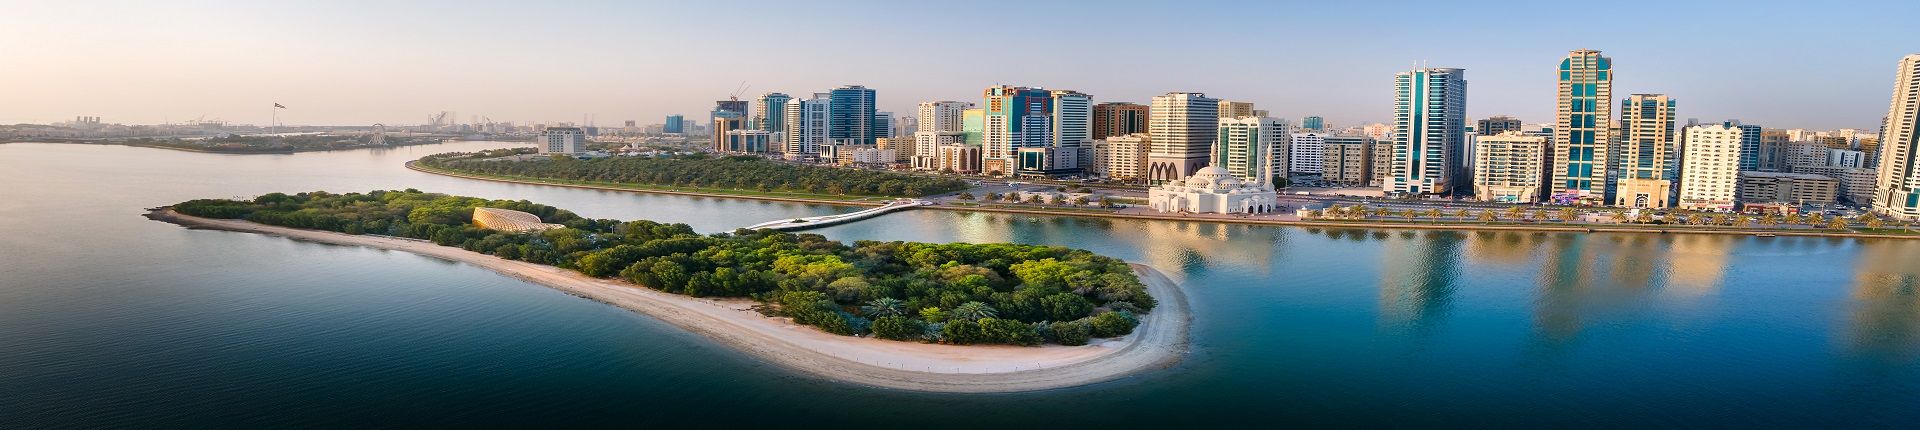 The list of top things to do in Sharjah